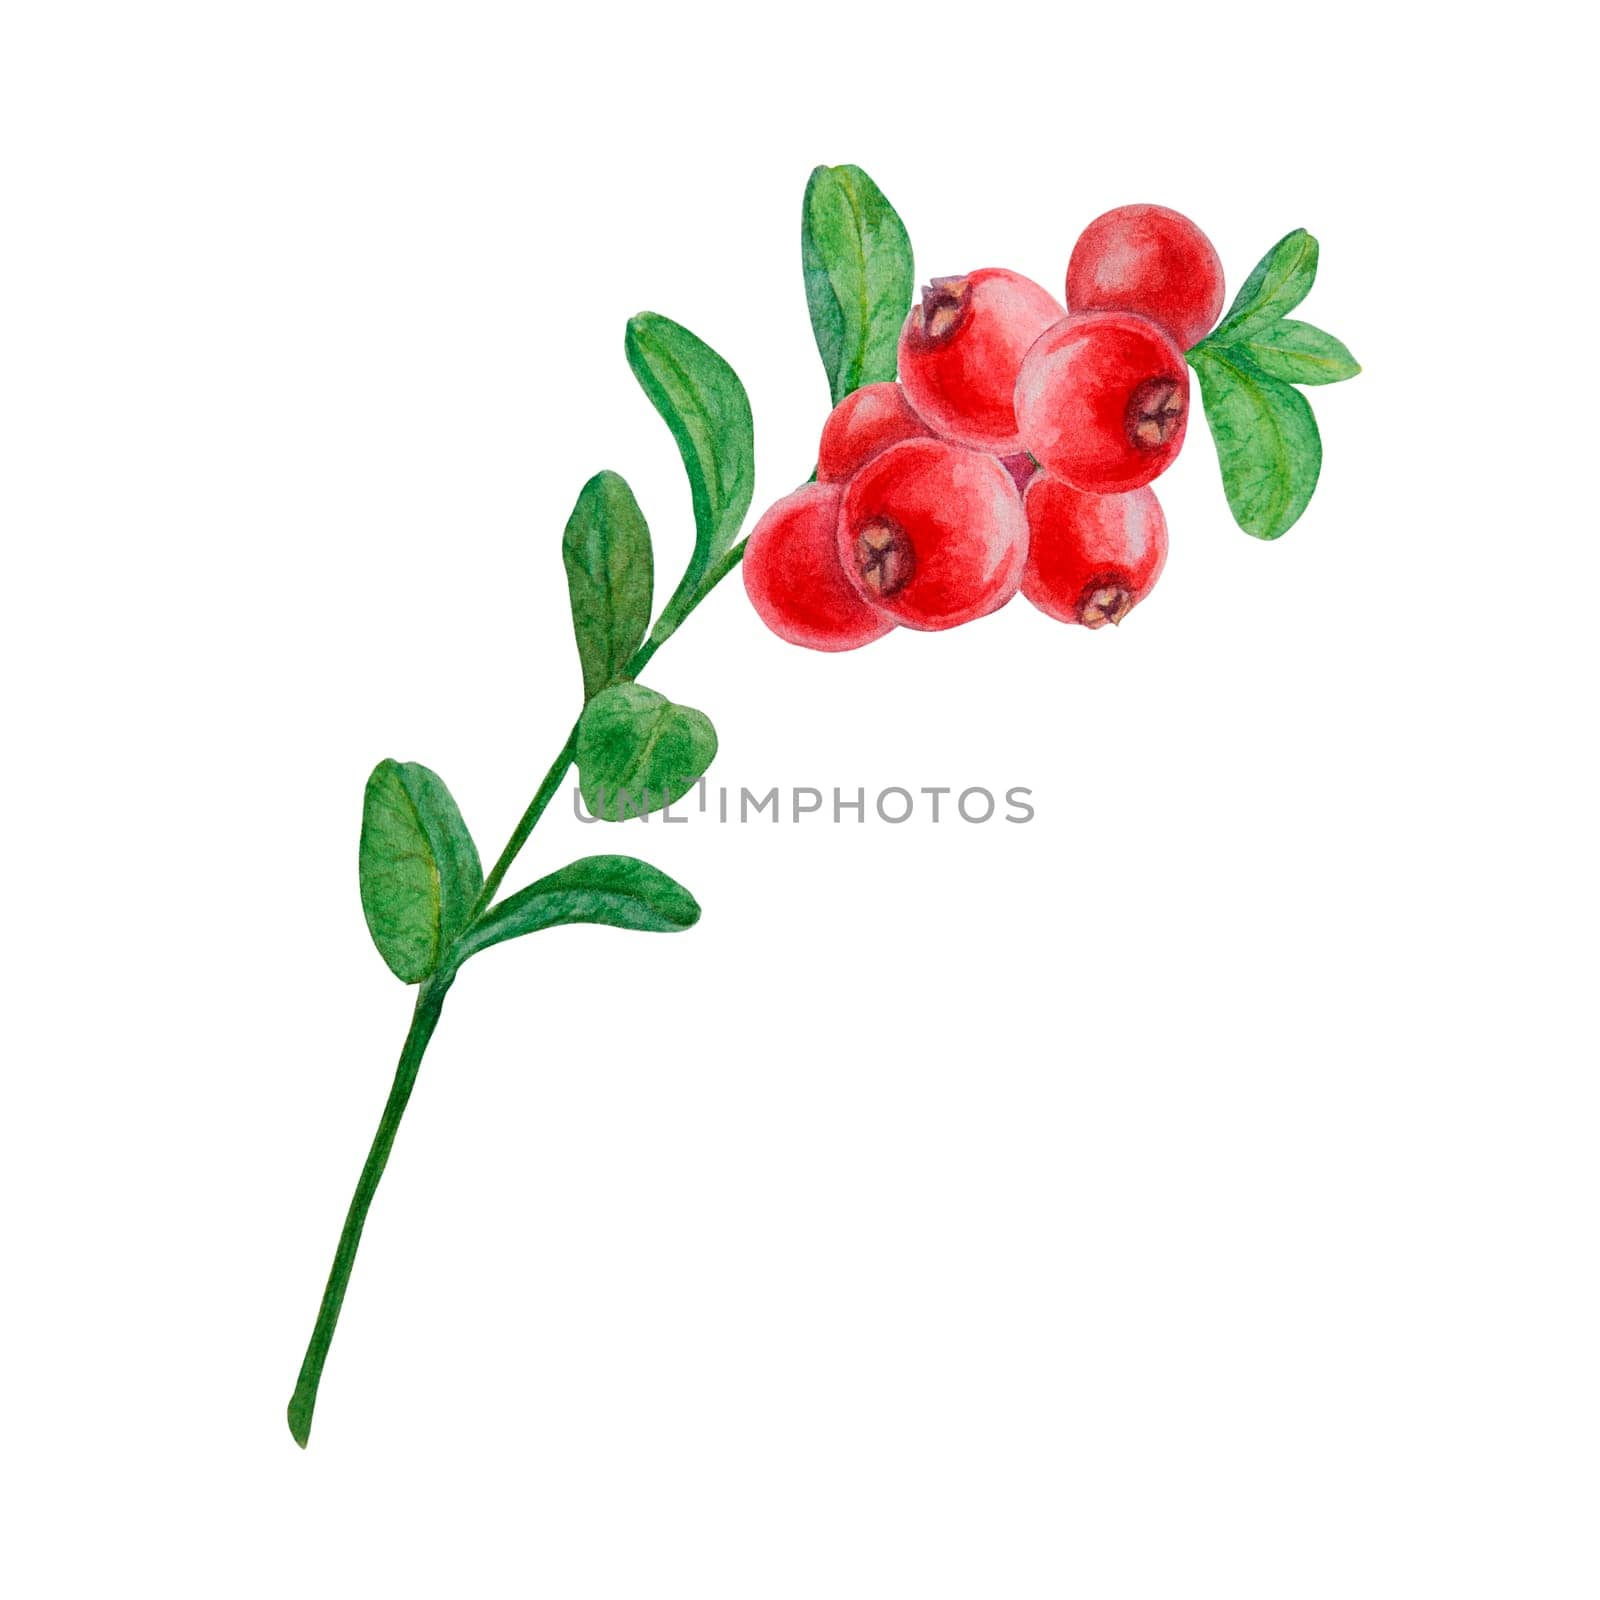 Wild red berries watercolor hand drawn botanical realistic illustration. Forest cranberry, cowberry branch isolated clip art. Great for printing on fabric, postcards, invitations, menus, prints by florainlove_art